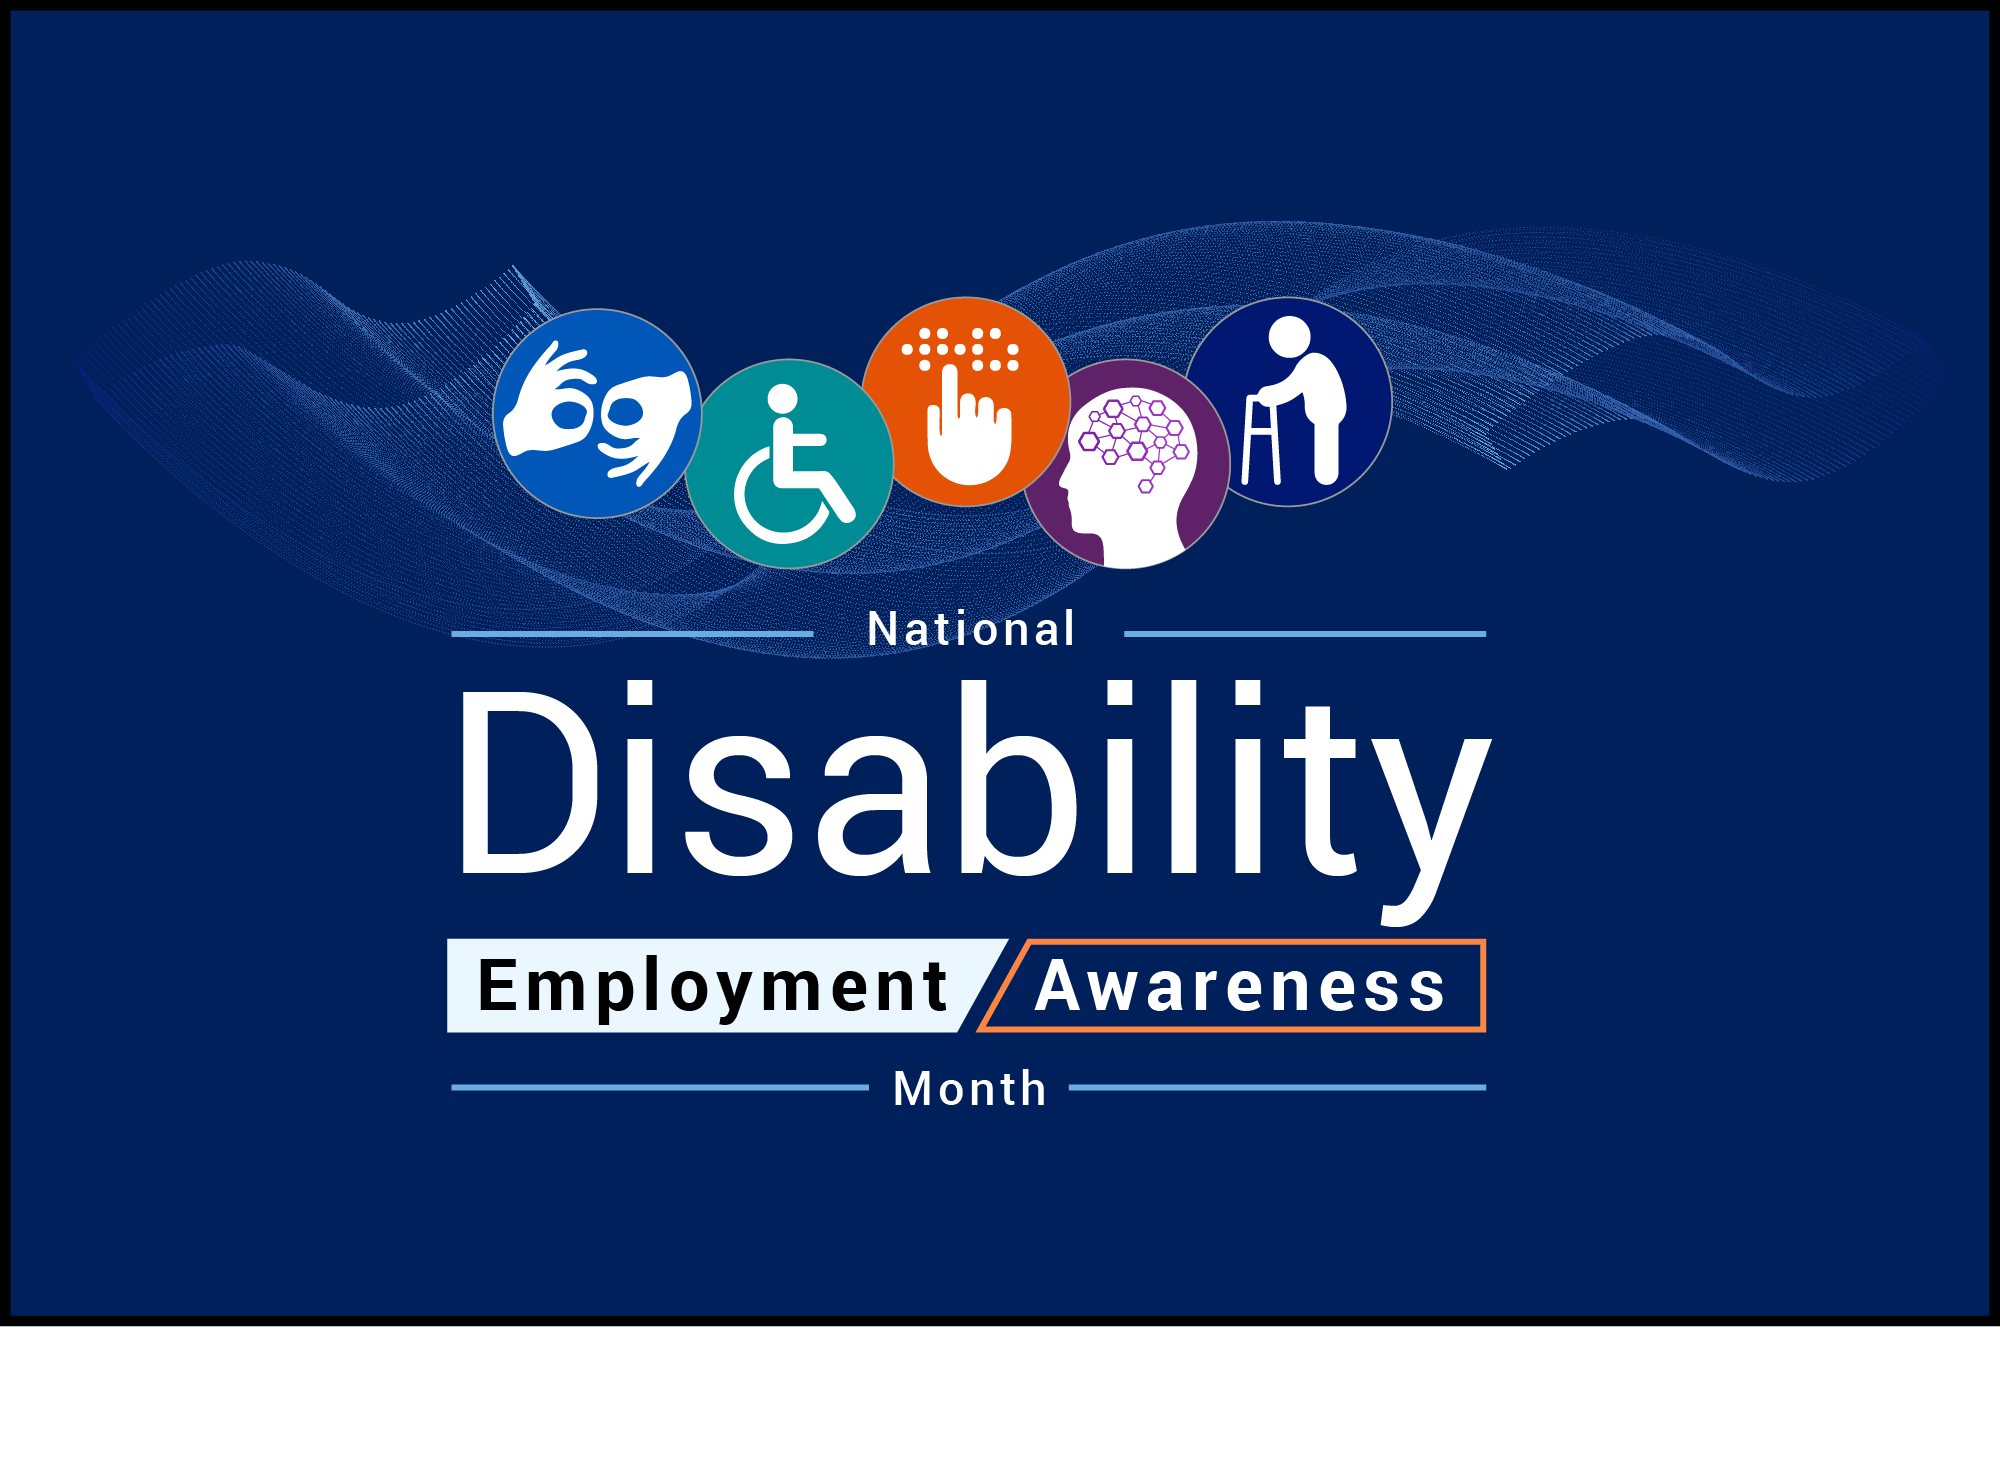 National Disability Employment Awareness Month text with icons representing different disabilities